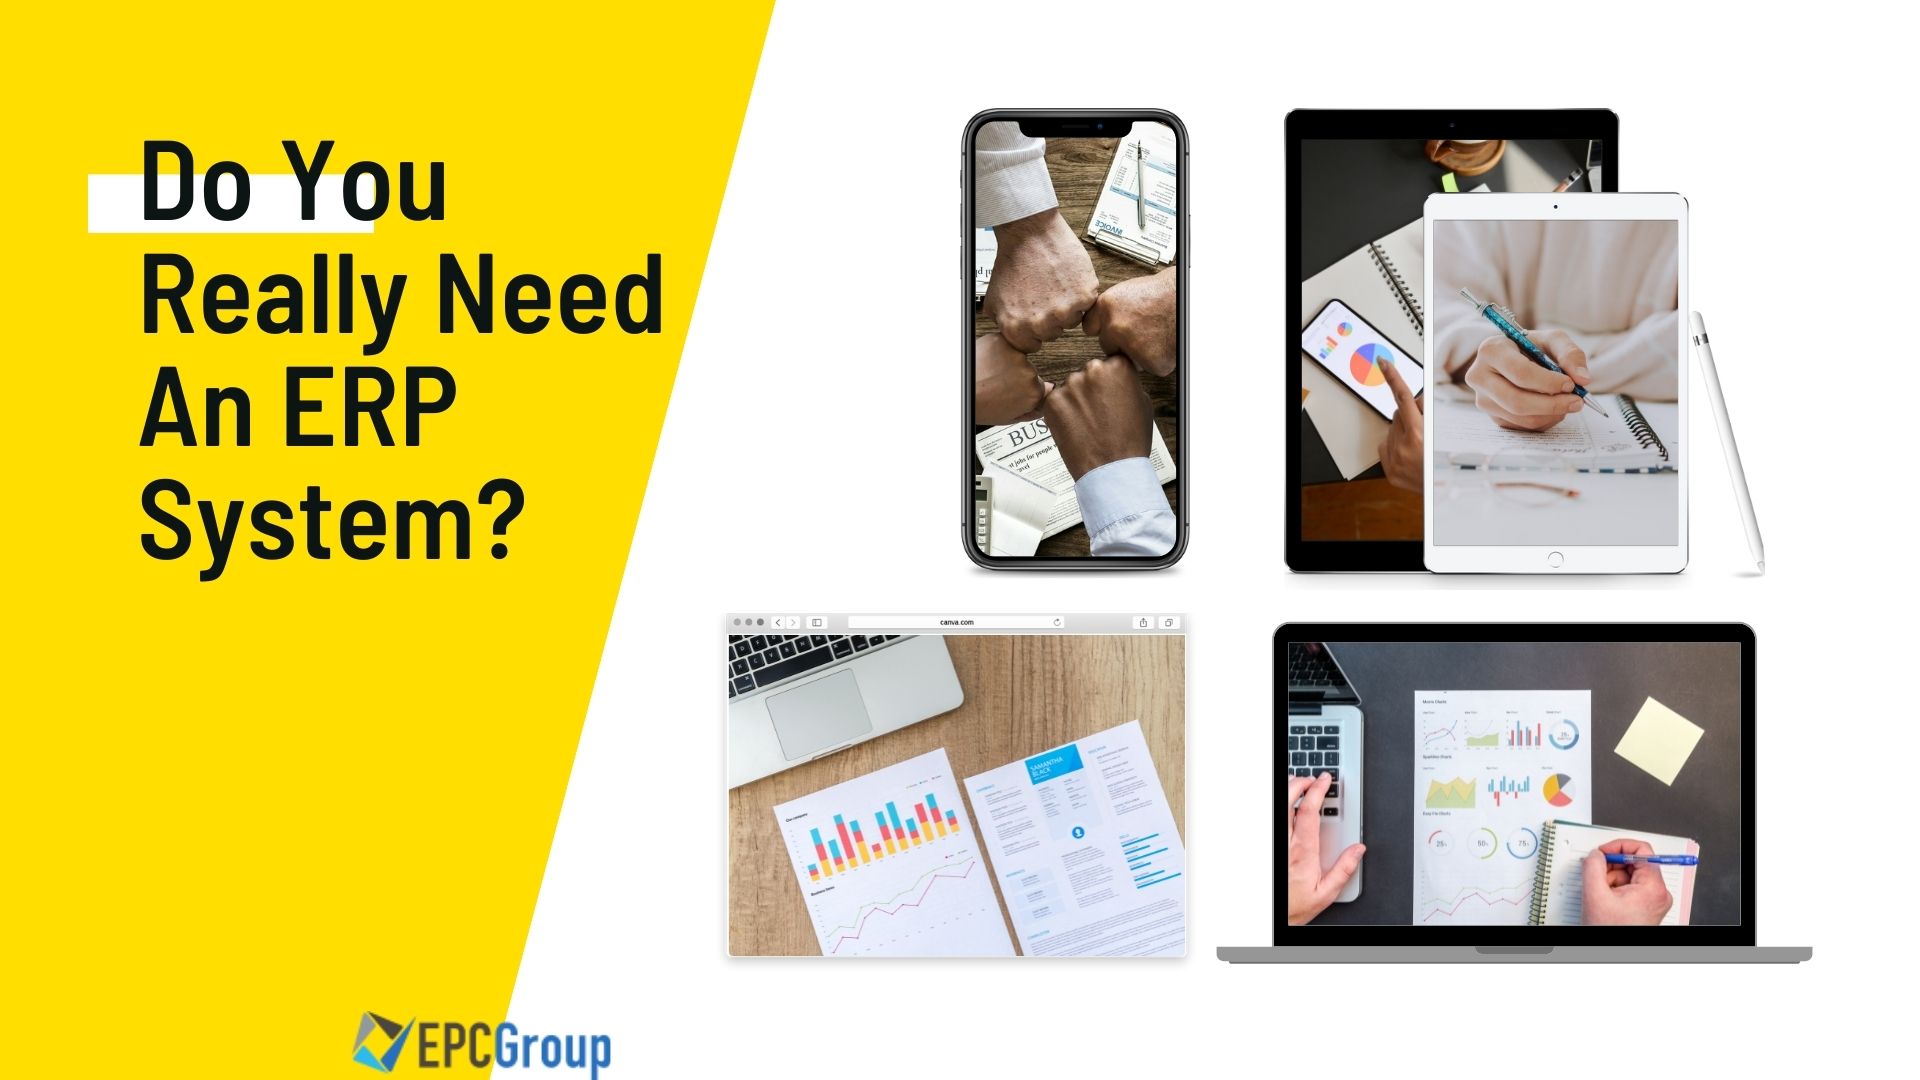 Why Is An ERP System Not Suitable For All Companies?